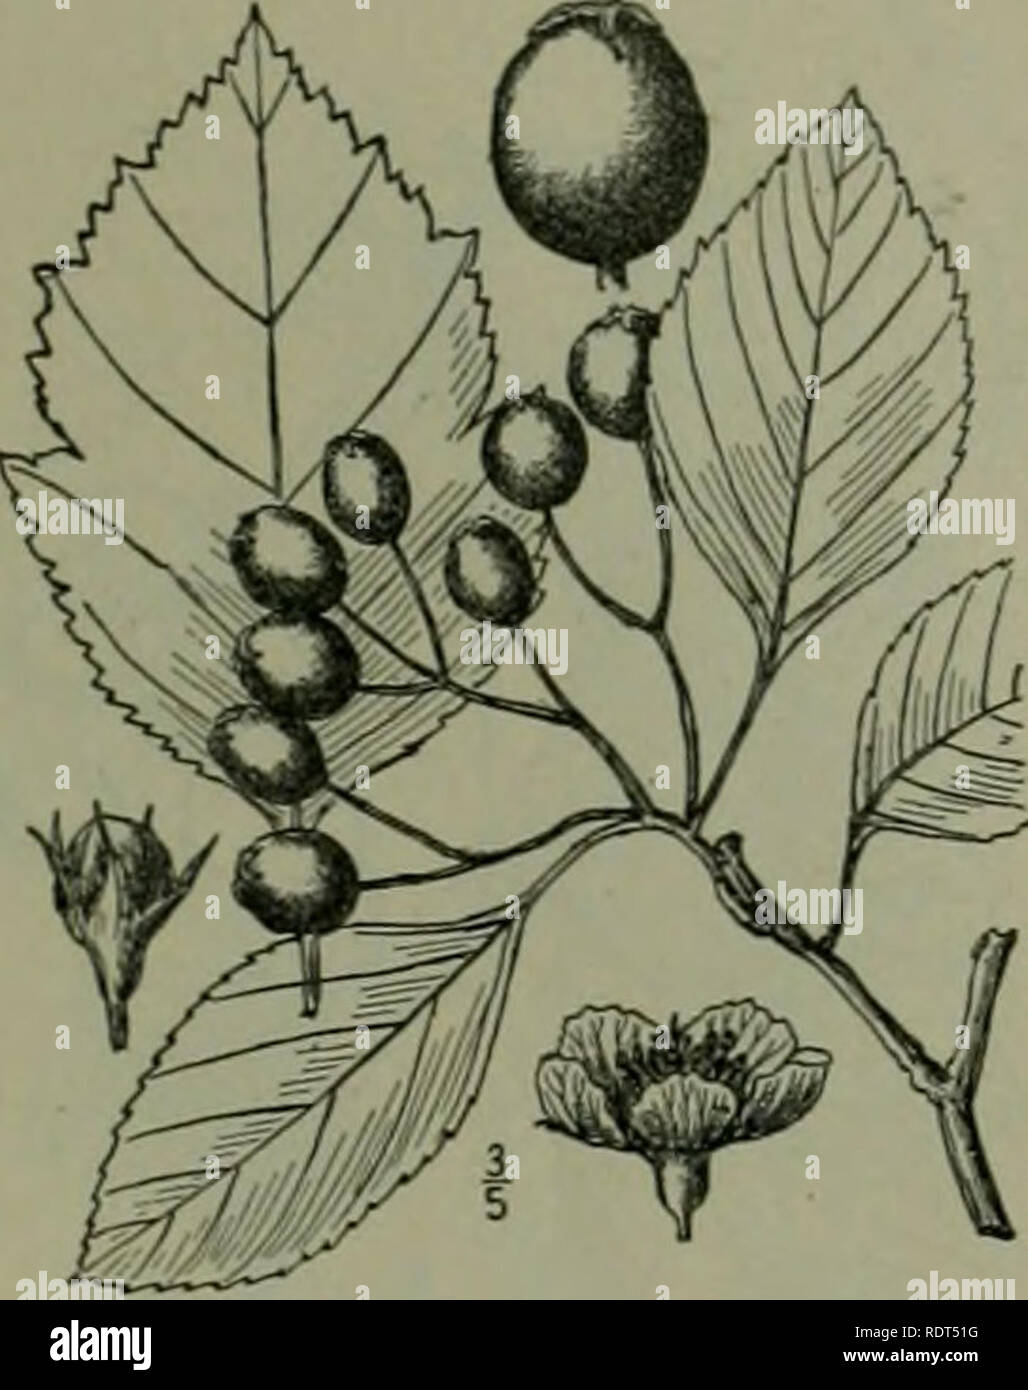 . An illustrated flora of the northern United States, Canada and the British possessions : from Newfoundland to the parallel of the southern boundary of Virginia and from the Atlantic Ocean westward to the 102nd meridian. Botany. APPLE FAMILY. 6. Crataegus Canbyi Sargent. Canby's Thorn. Fig. 2340. 'rCrataegus elliftica .it. Hort. Kew. 2: 168. 1789. Mestilus elliptica Hayne, Dendr. FI. 78. 1822. (Guimpel. Otto and Hayne Abbild. Deutsch. Holz. pi. 144. 1819- 1830.) Crataegus Canbyi Sarg. Bot. Gaz. 31: 3. 1901. C. Pennypackeri Sarg. Bot. Gaz. 35: 100. 1903. A sitiall tree, 20° high, with somewha Stock Photo